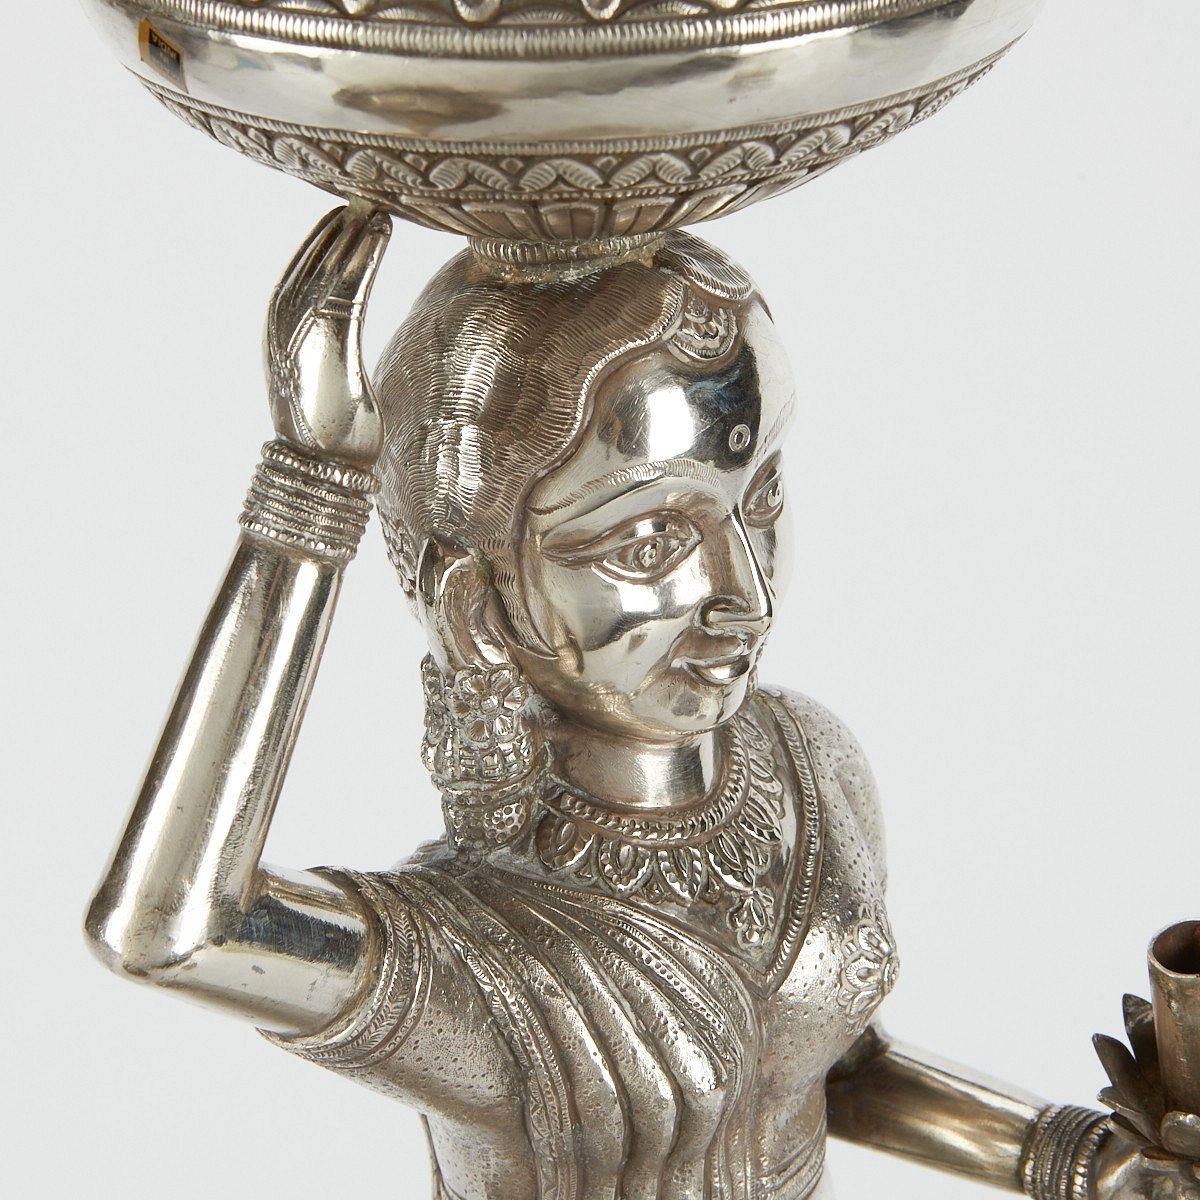 Our palatial sized figurative Indian hookah depicting a lovely woman holding a snake is finely crafted from silver of .900 purity and exhibits exceptional chasing and repoussage.  Marked 